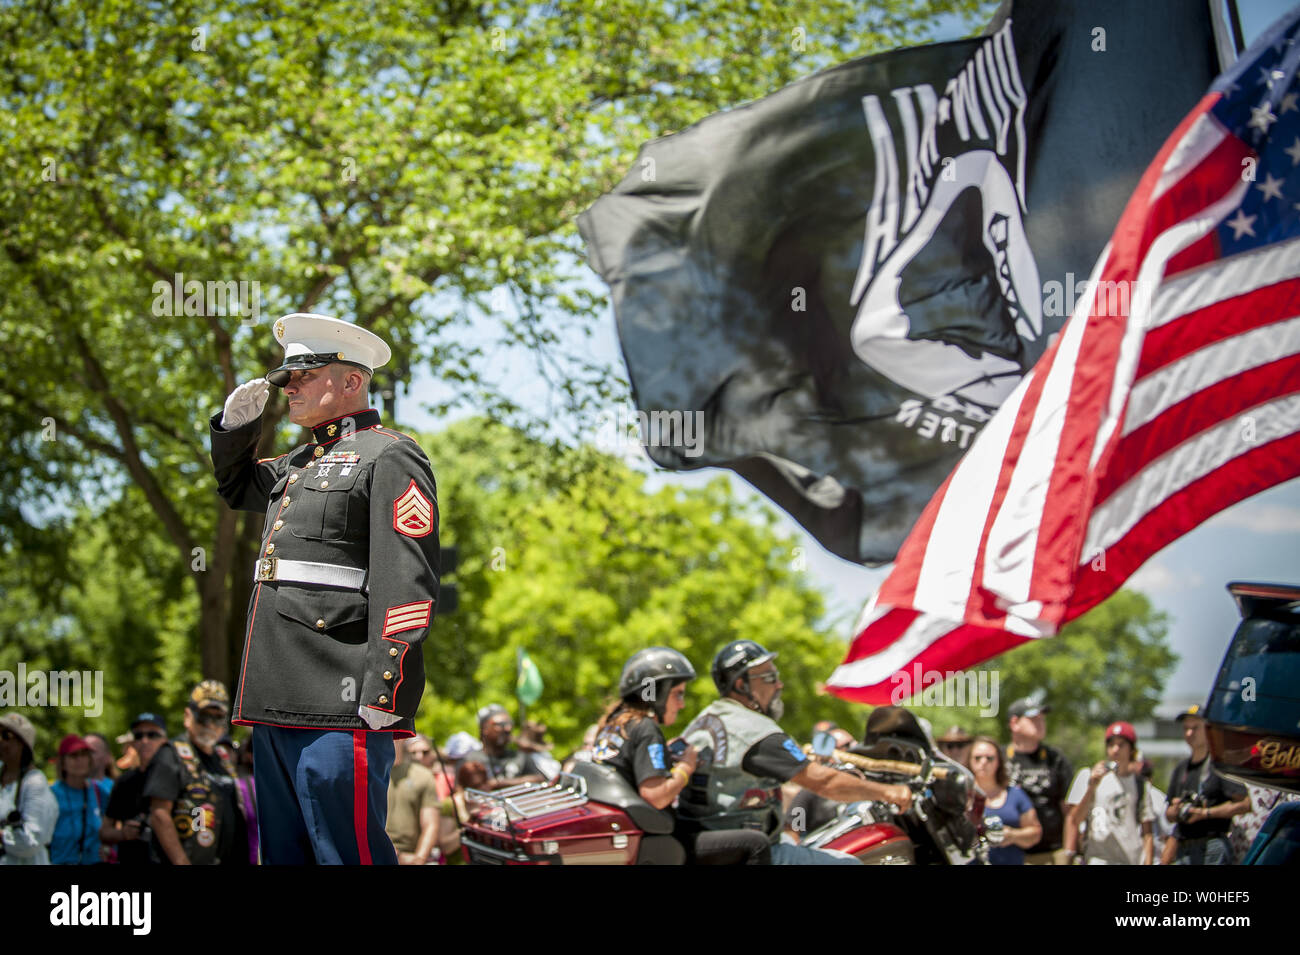 For the 12th consecutive year, former United States Marine Tim Chambers holds a salute to honor fallen veterans as hundreds of thousands of motorcycle riders participate in the Rolling Thunder Motorcycle Rally XXVII, on Memorial Day weekend, May 25, 2014 in Washington, D.C. Hundreds of thousands of bikers annually converge on Washington for the rally to remember America's military veterans, POWs and MIAs.   UPI/Pete Marovich Stock Photo